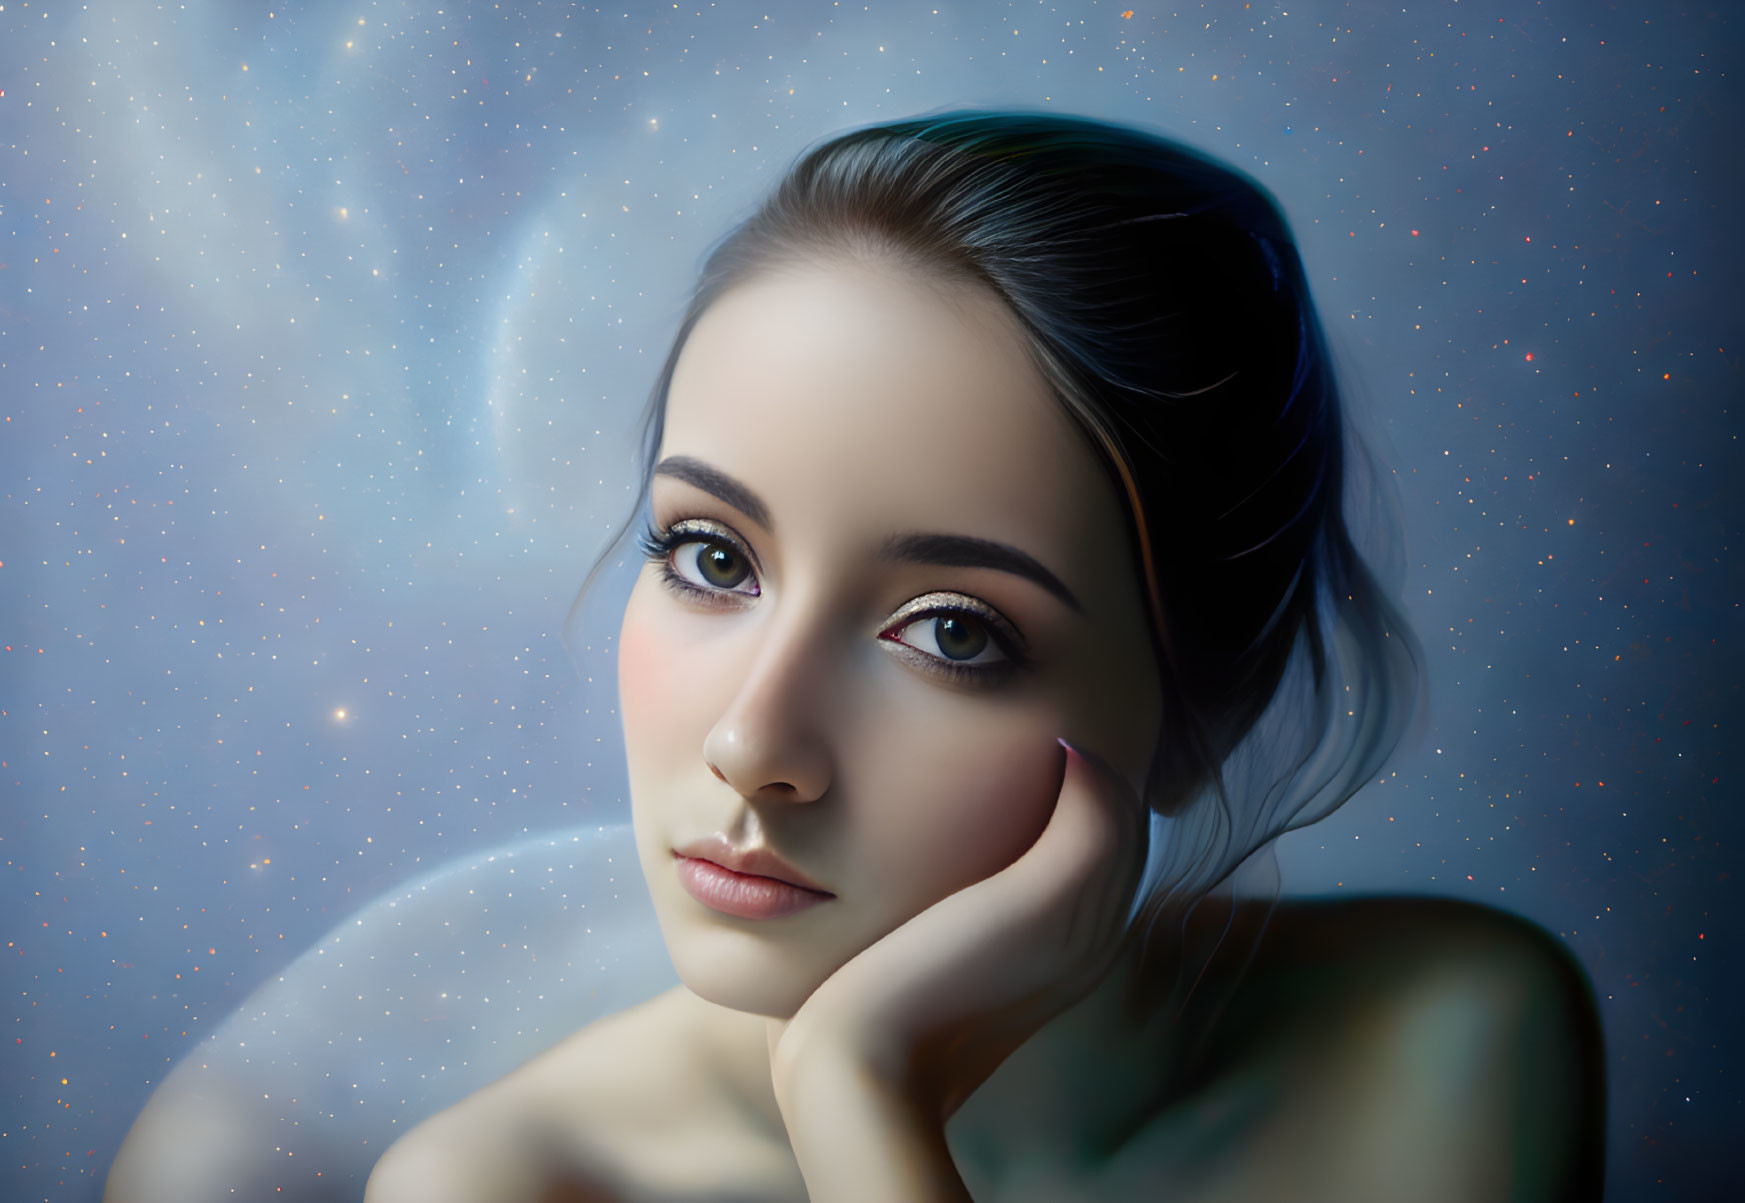 Woman with serene expression against starry backdrop